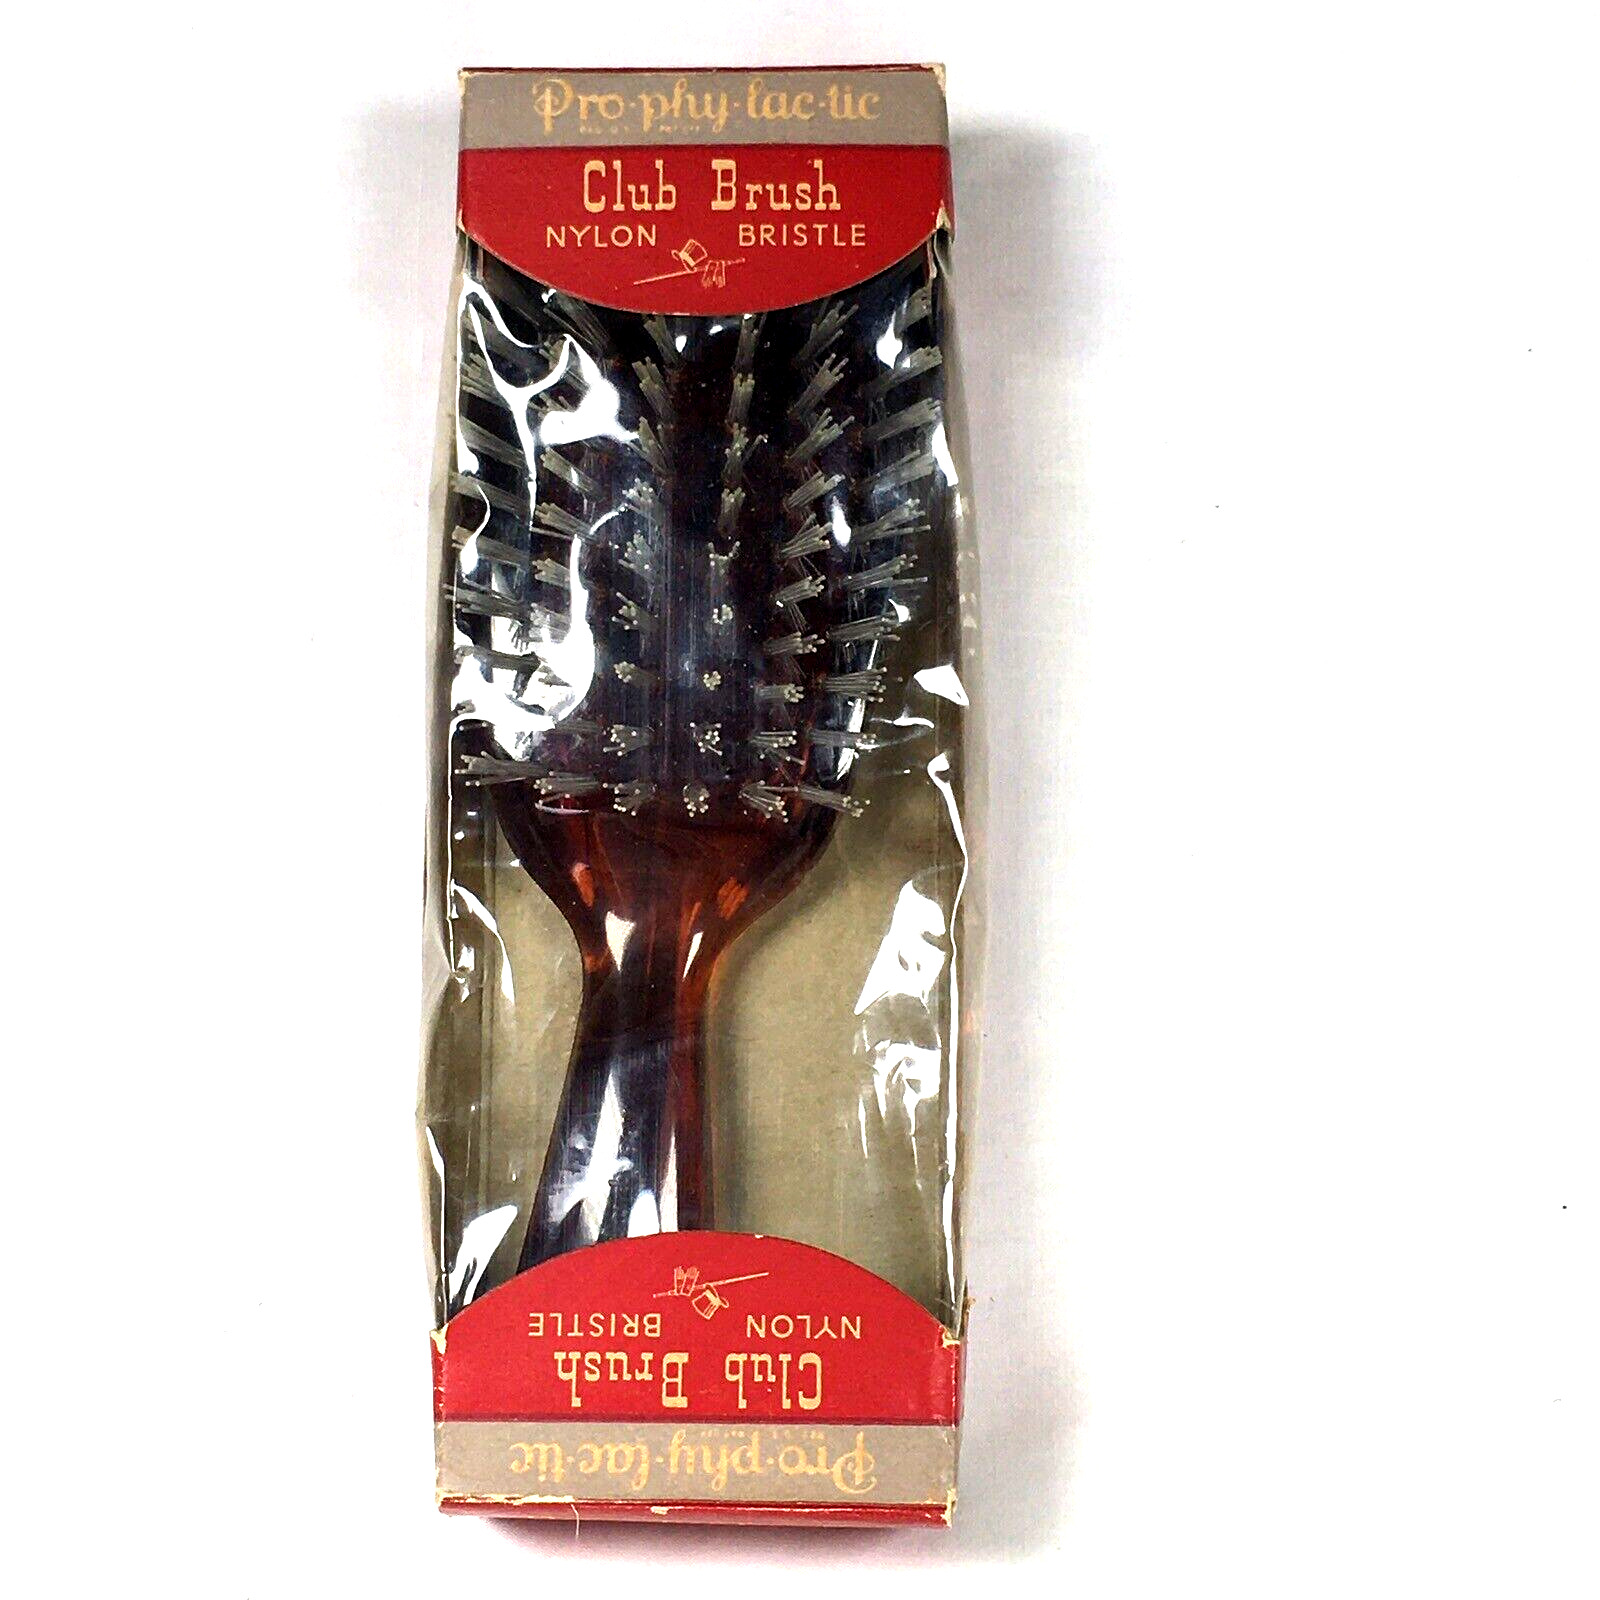 Pro-phy-lac-tic Hair Brush Vintage Nylon Bristle Root beer Brown Lucite Package